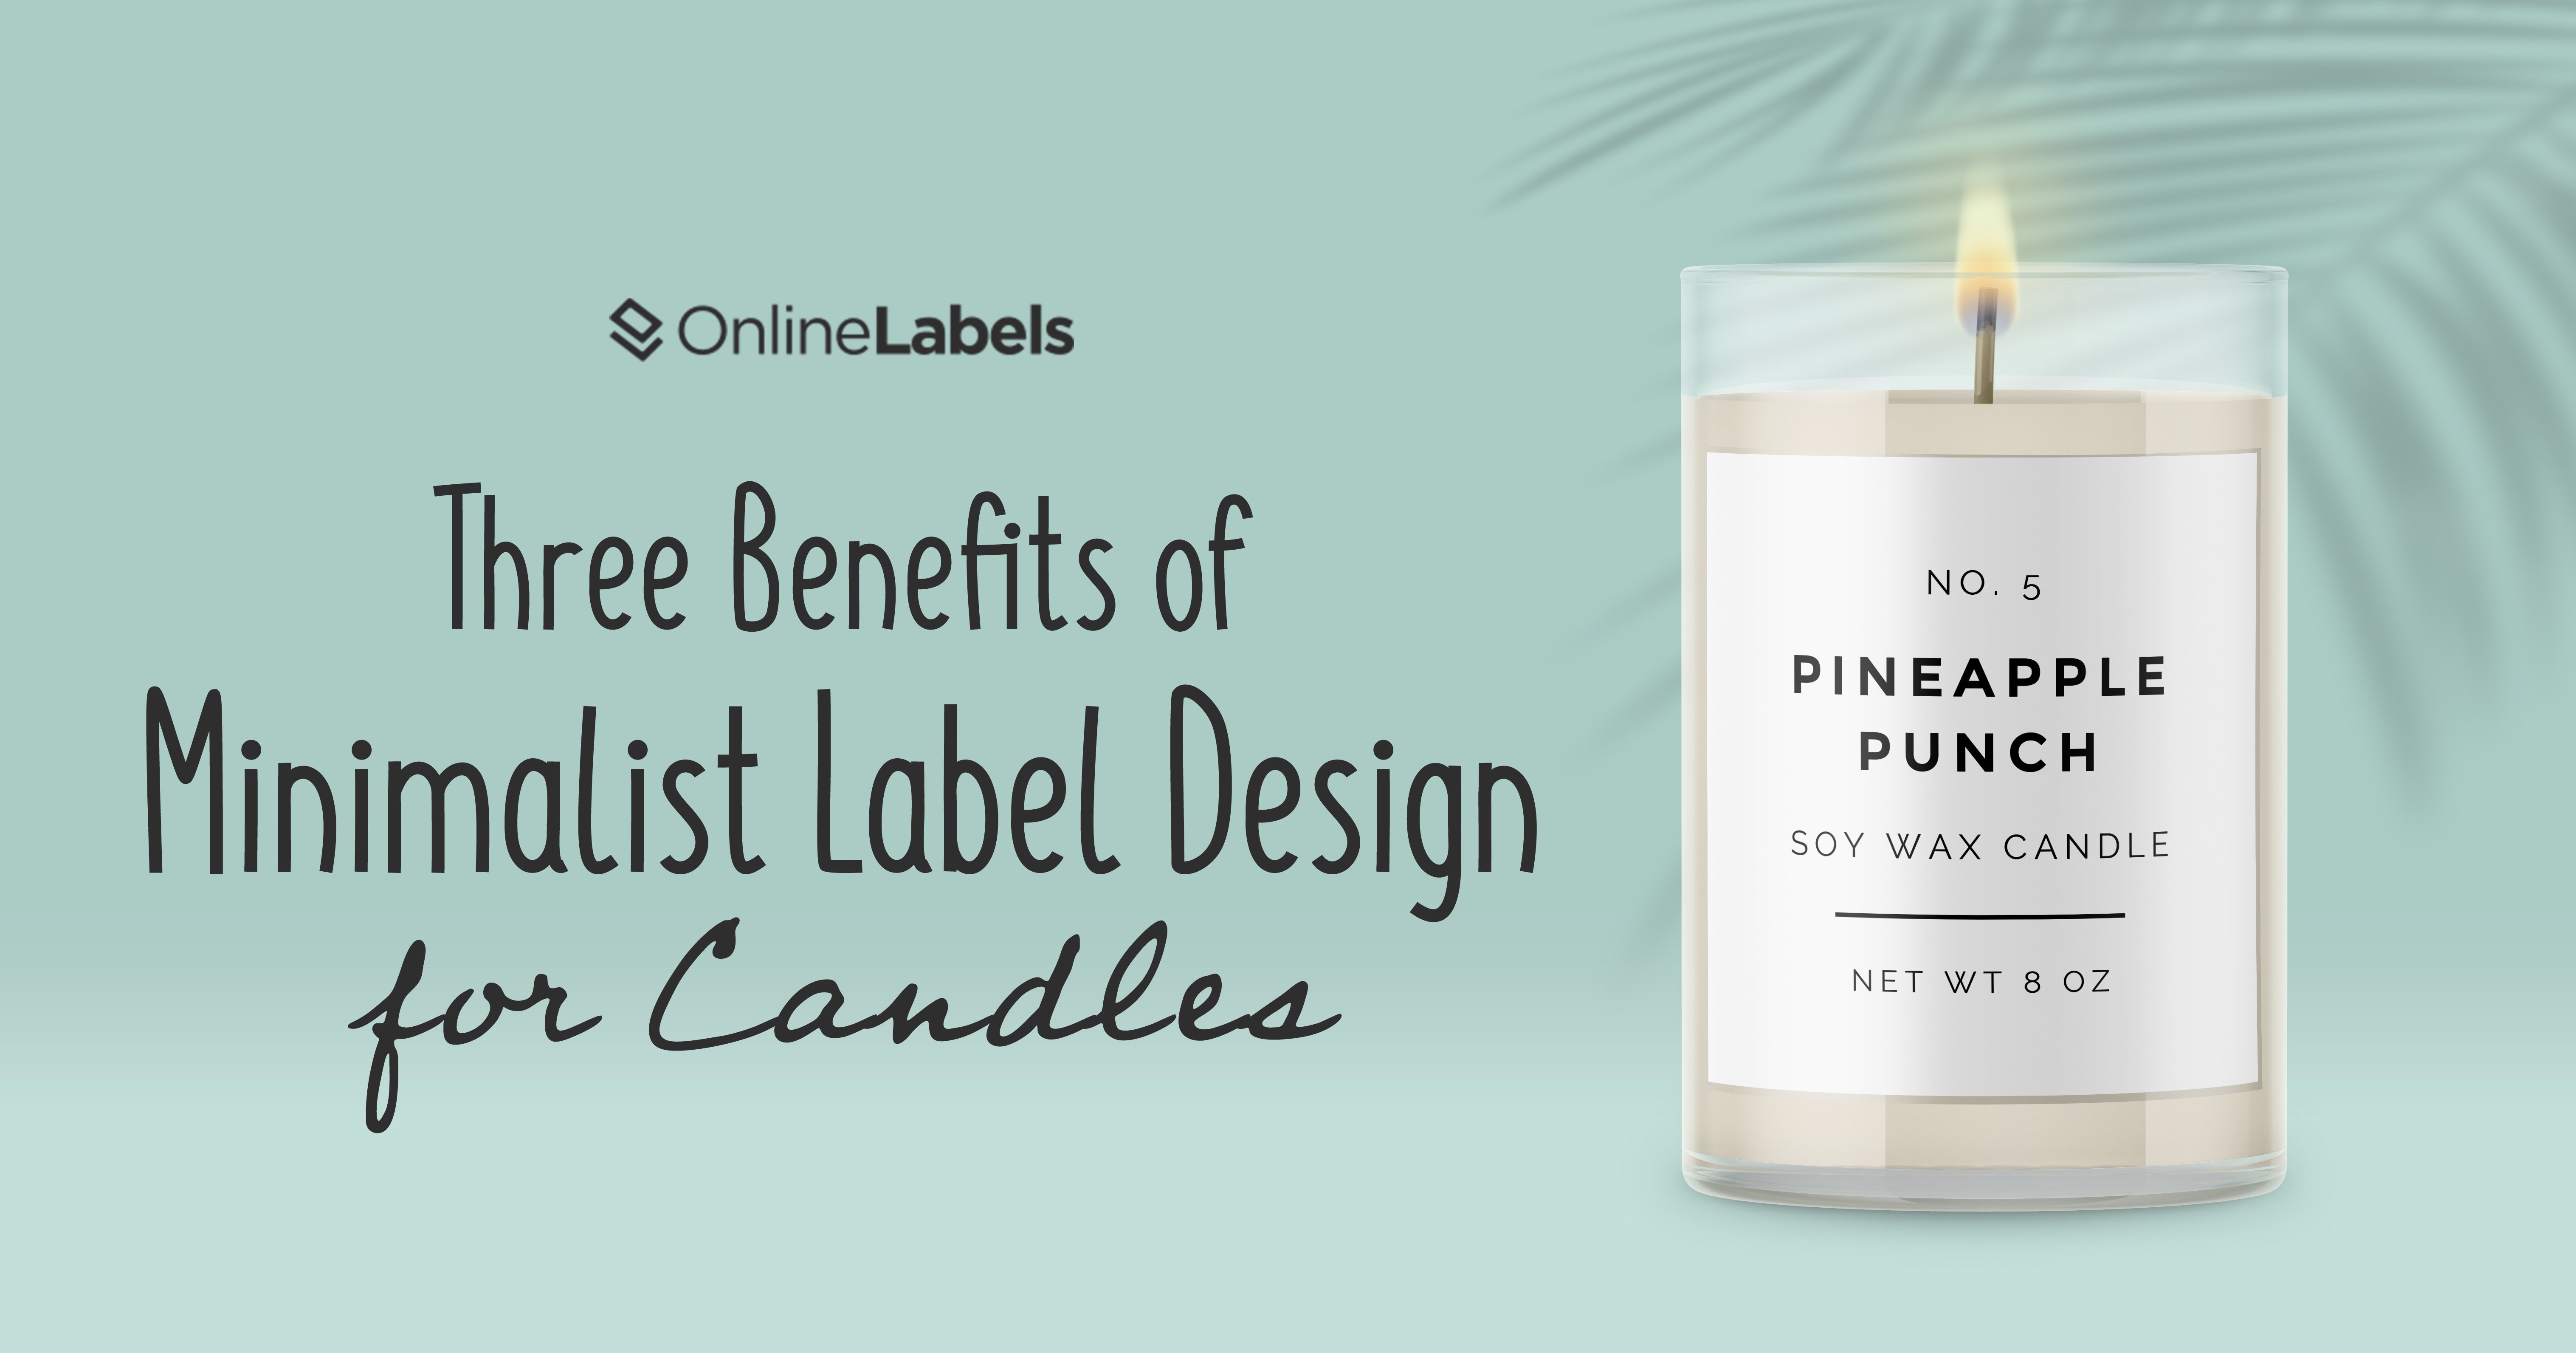 Three benefits of minimalist label design for candles.